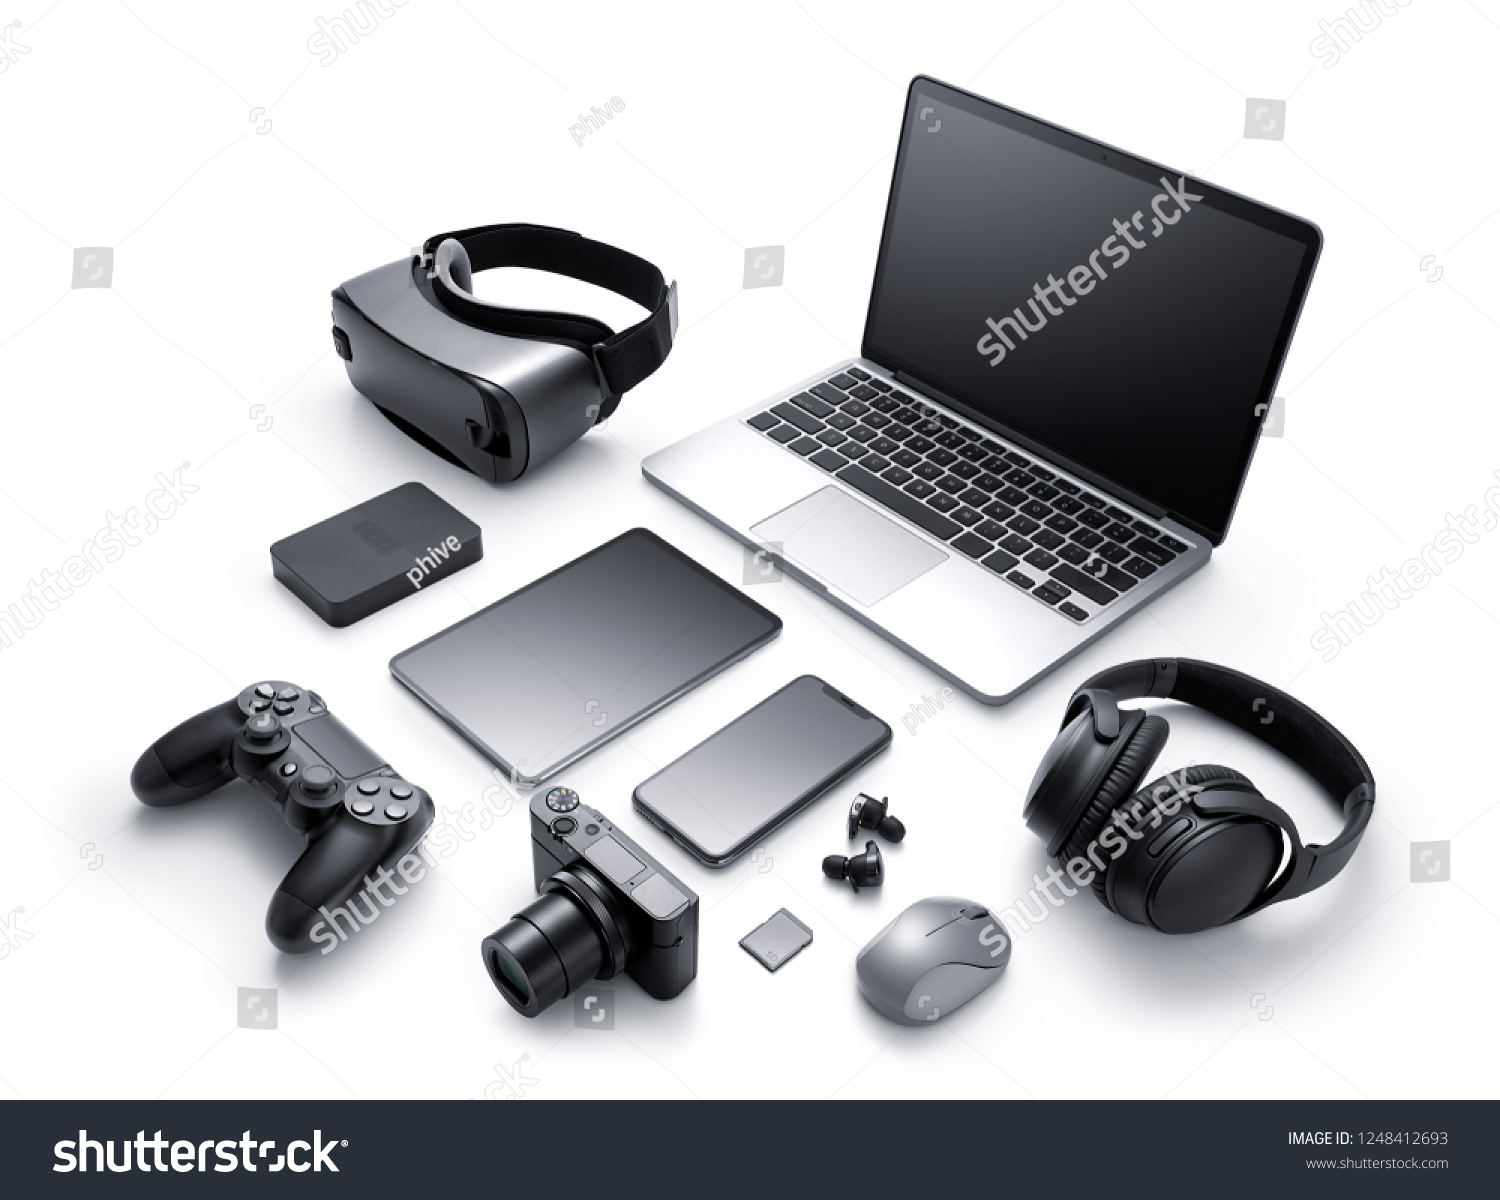 Gadgets and accessories isolated on white background #1248412693